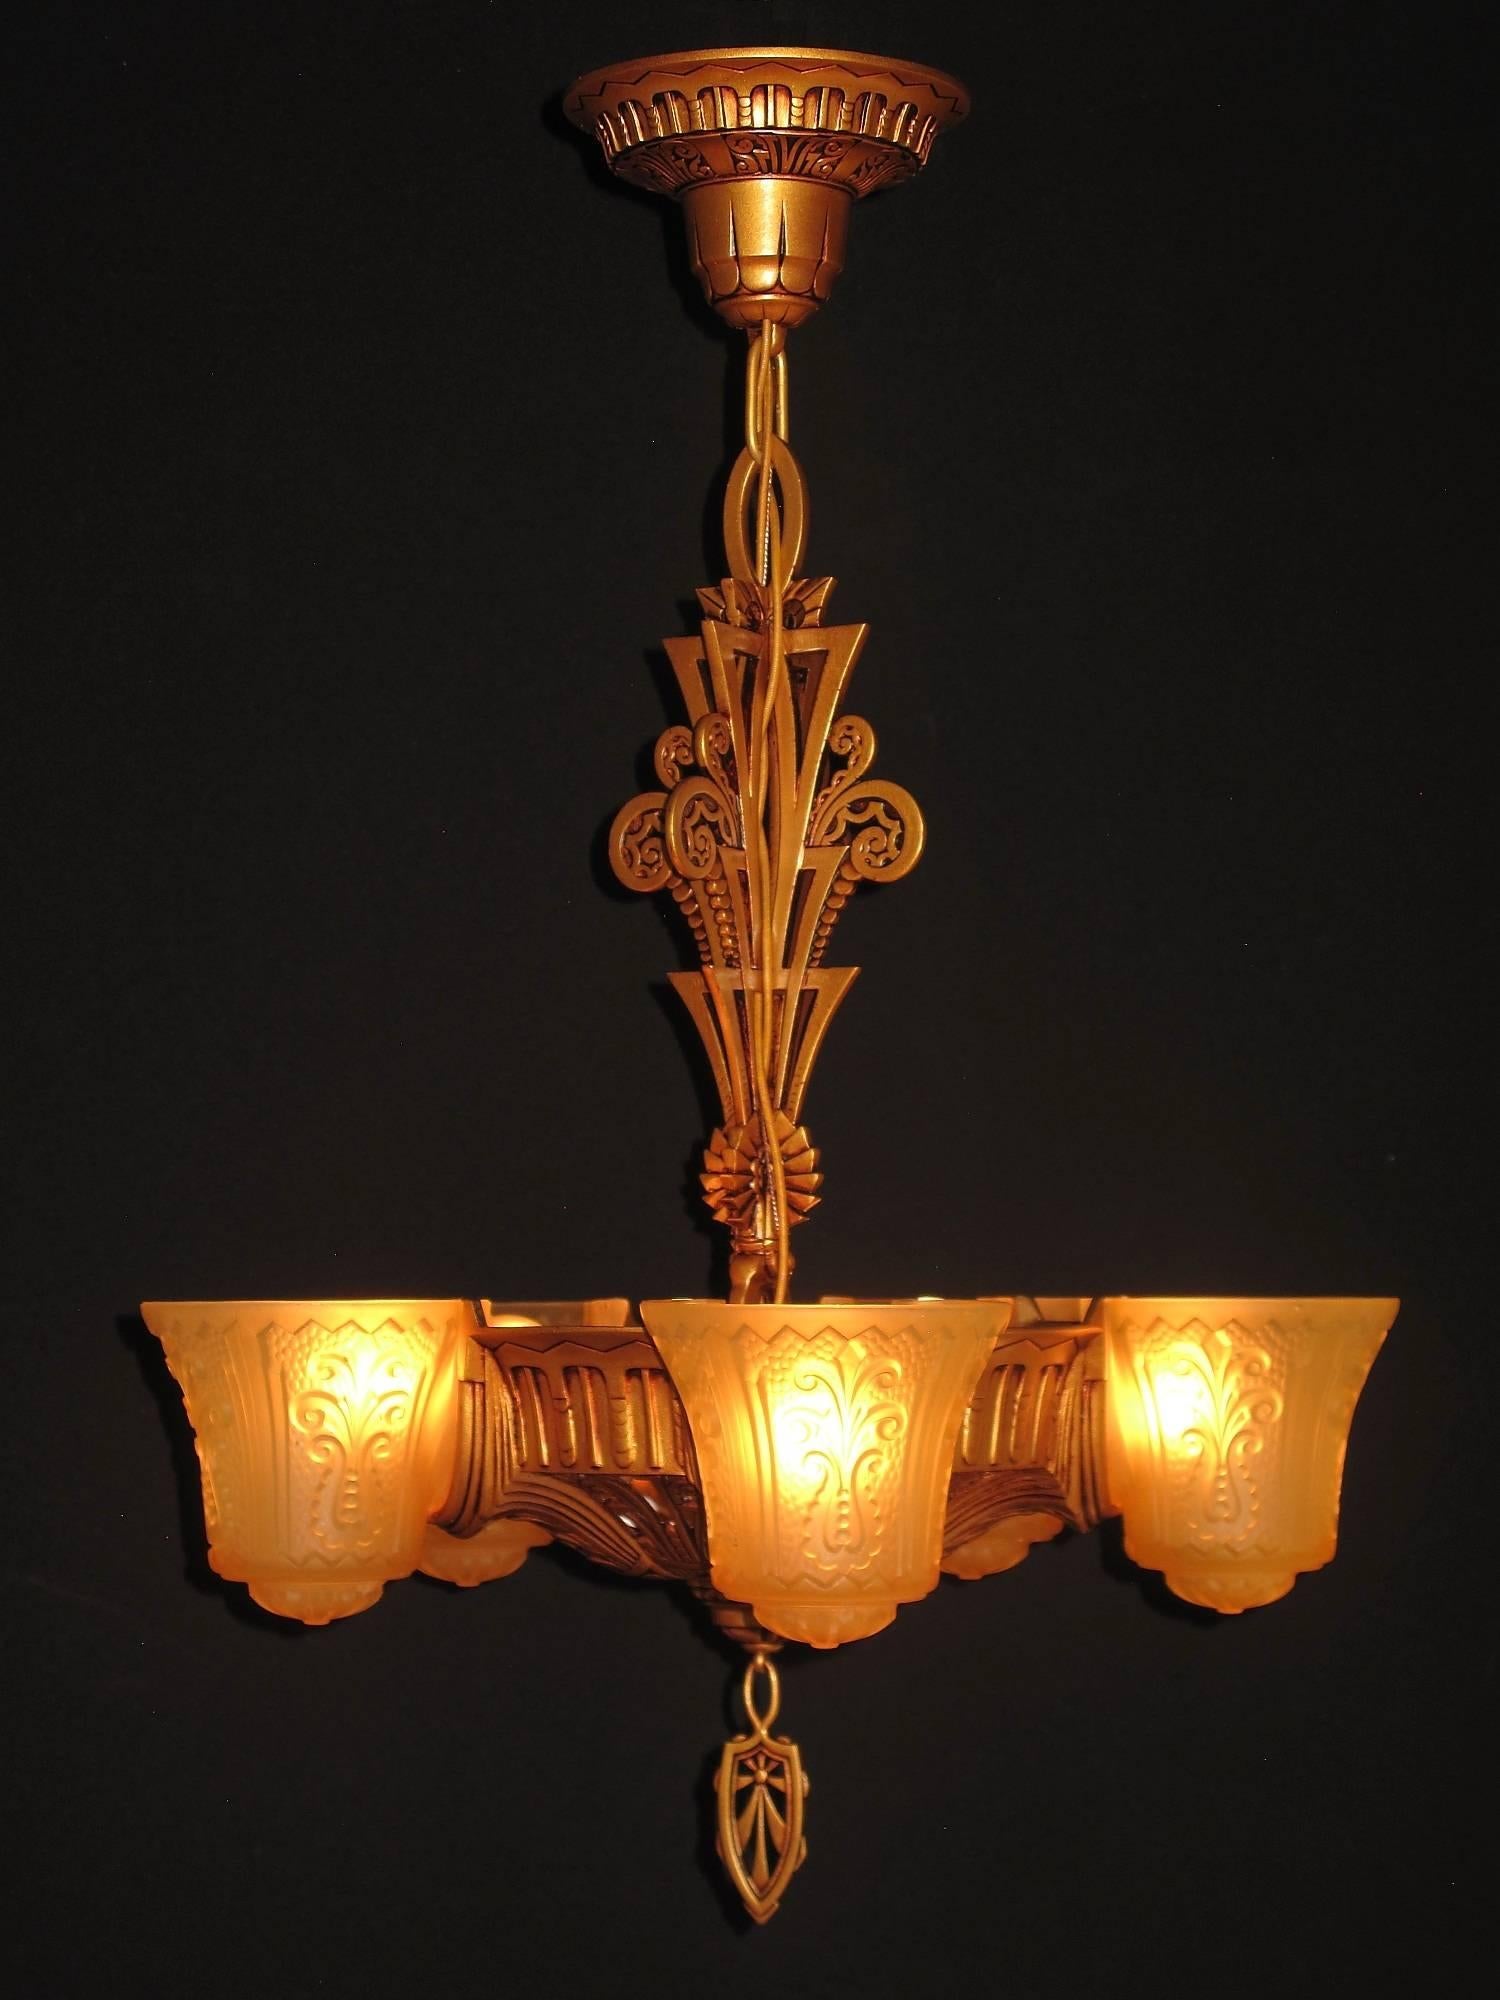 Art Deco Beardslee Slip Shade Fixture Antique Golden with Amber Shades For Sale